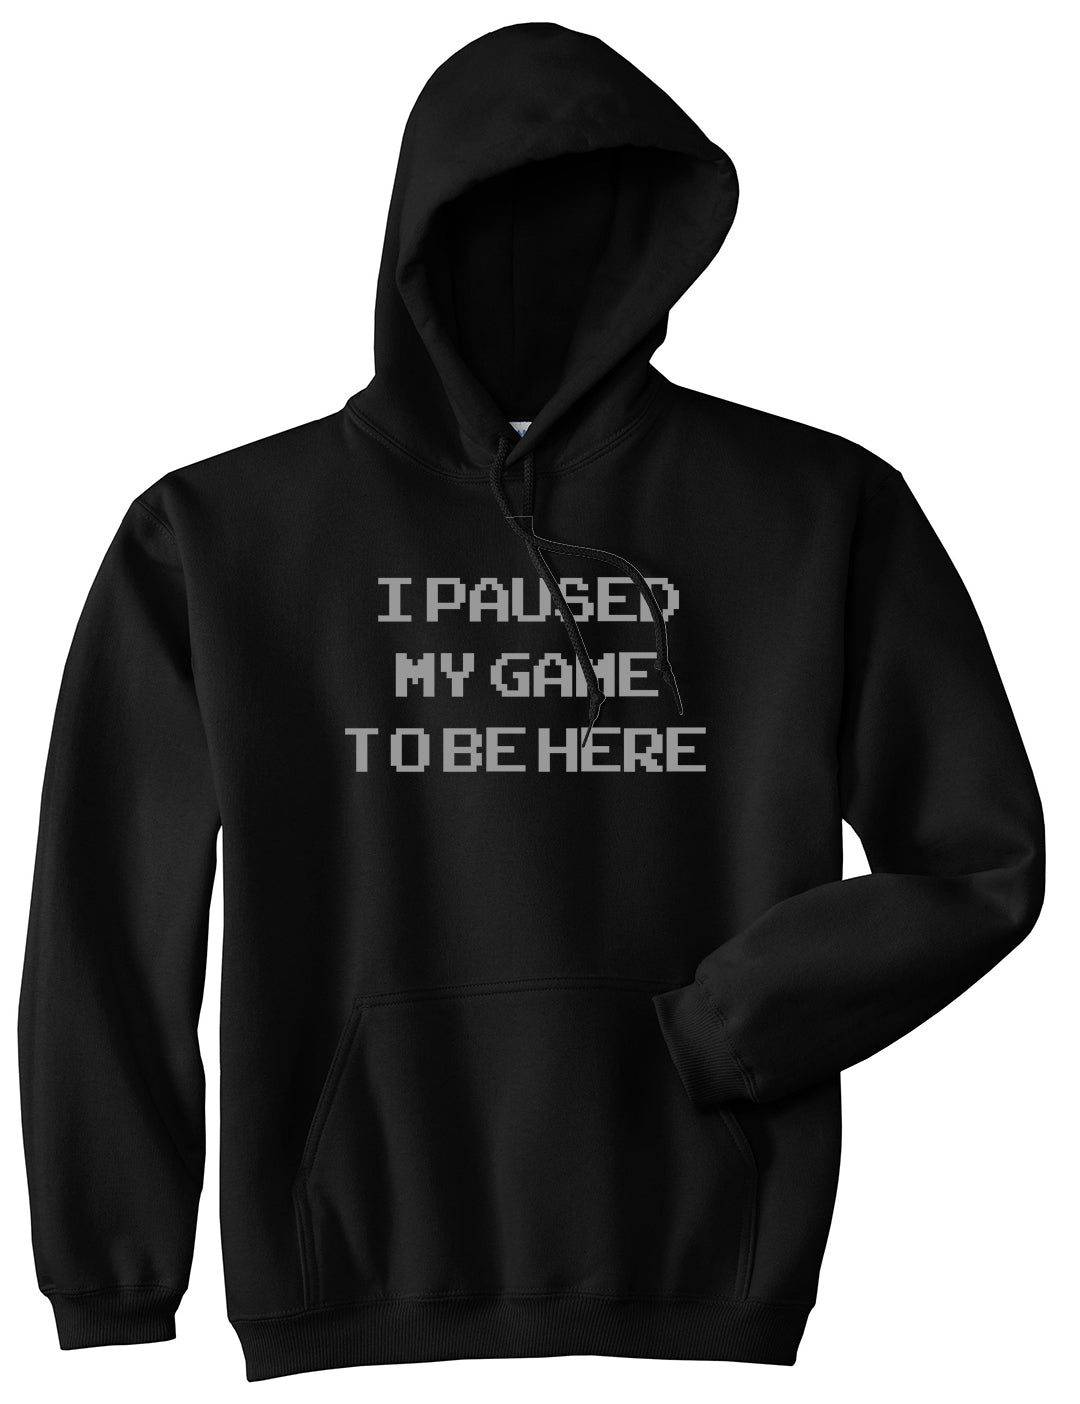 I Paused My Game To Be Here Gamer Mens Pullover Hoodie Black